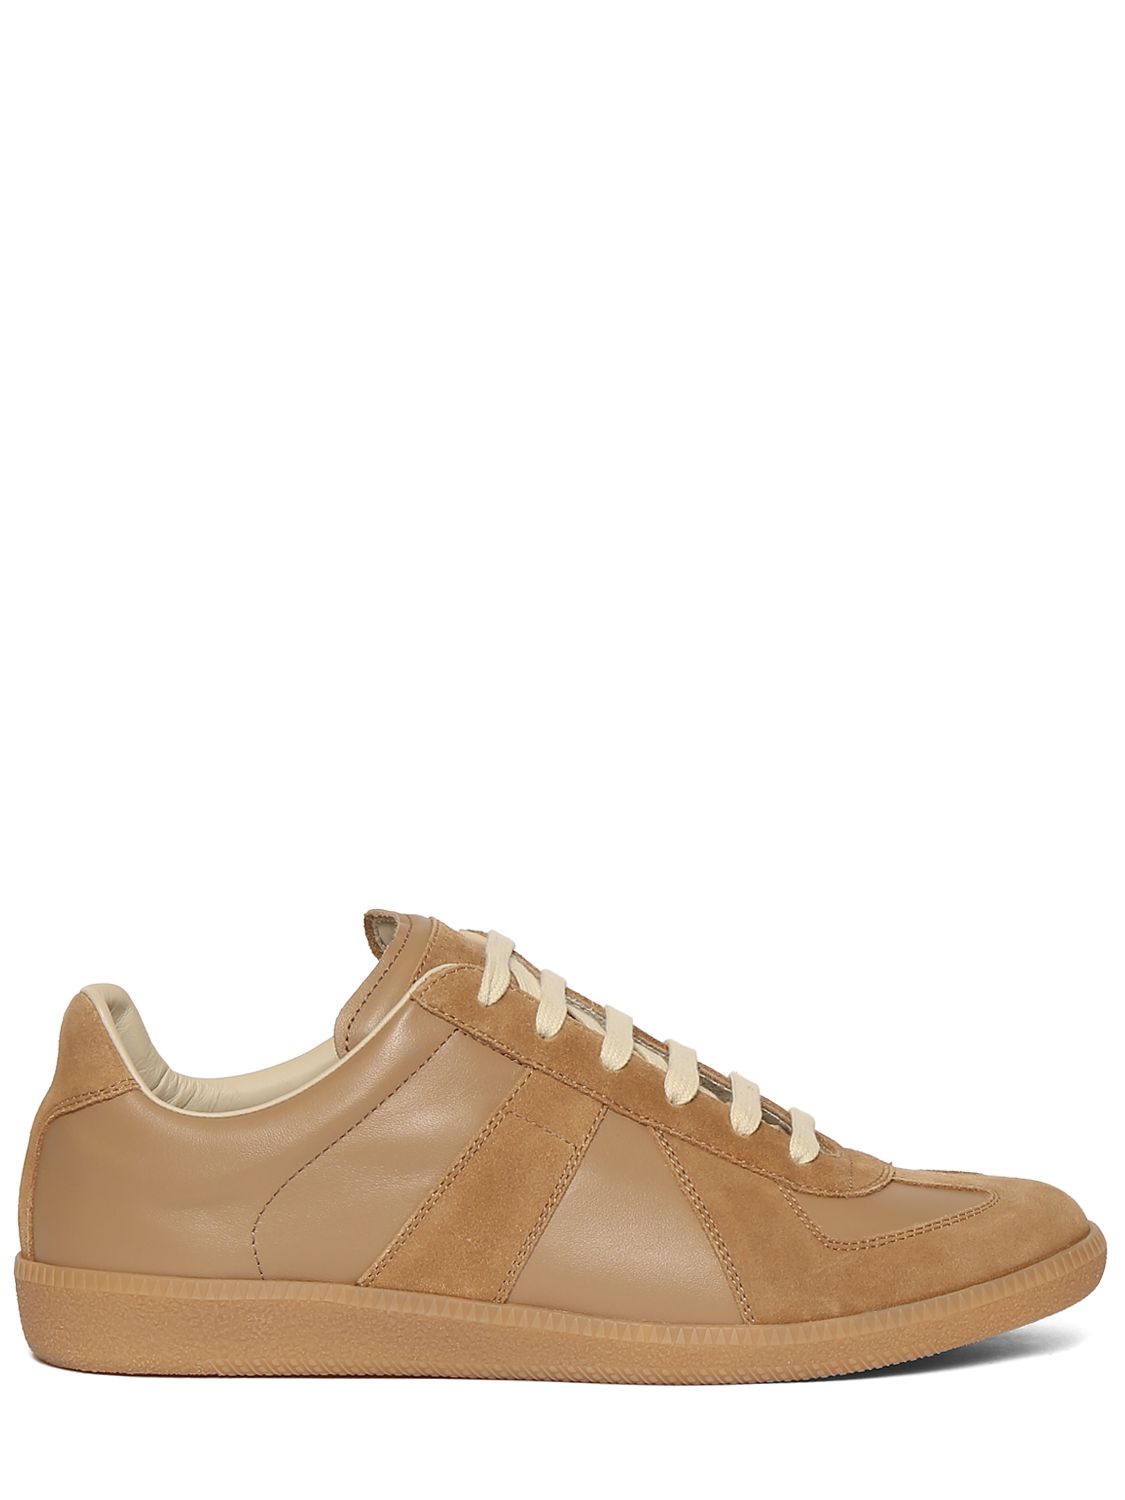 Replica Leather & Suede Low Top Sneakers